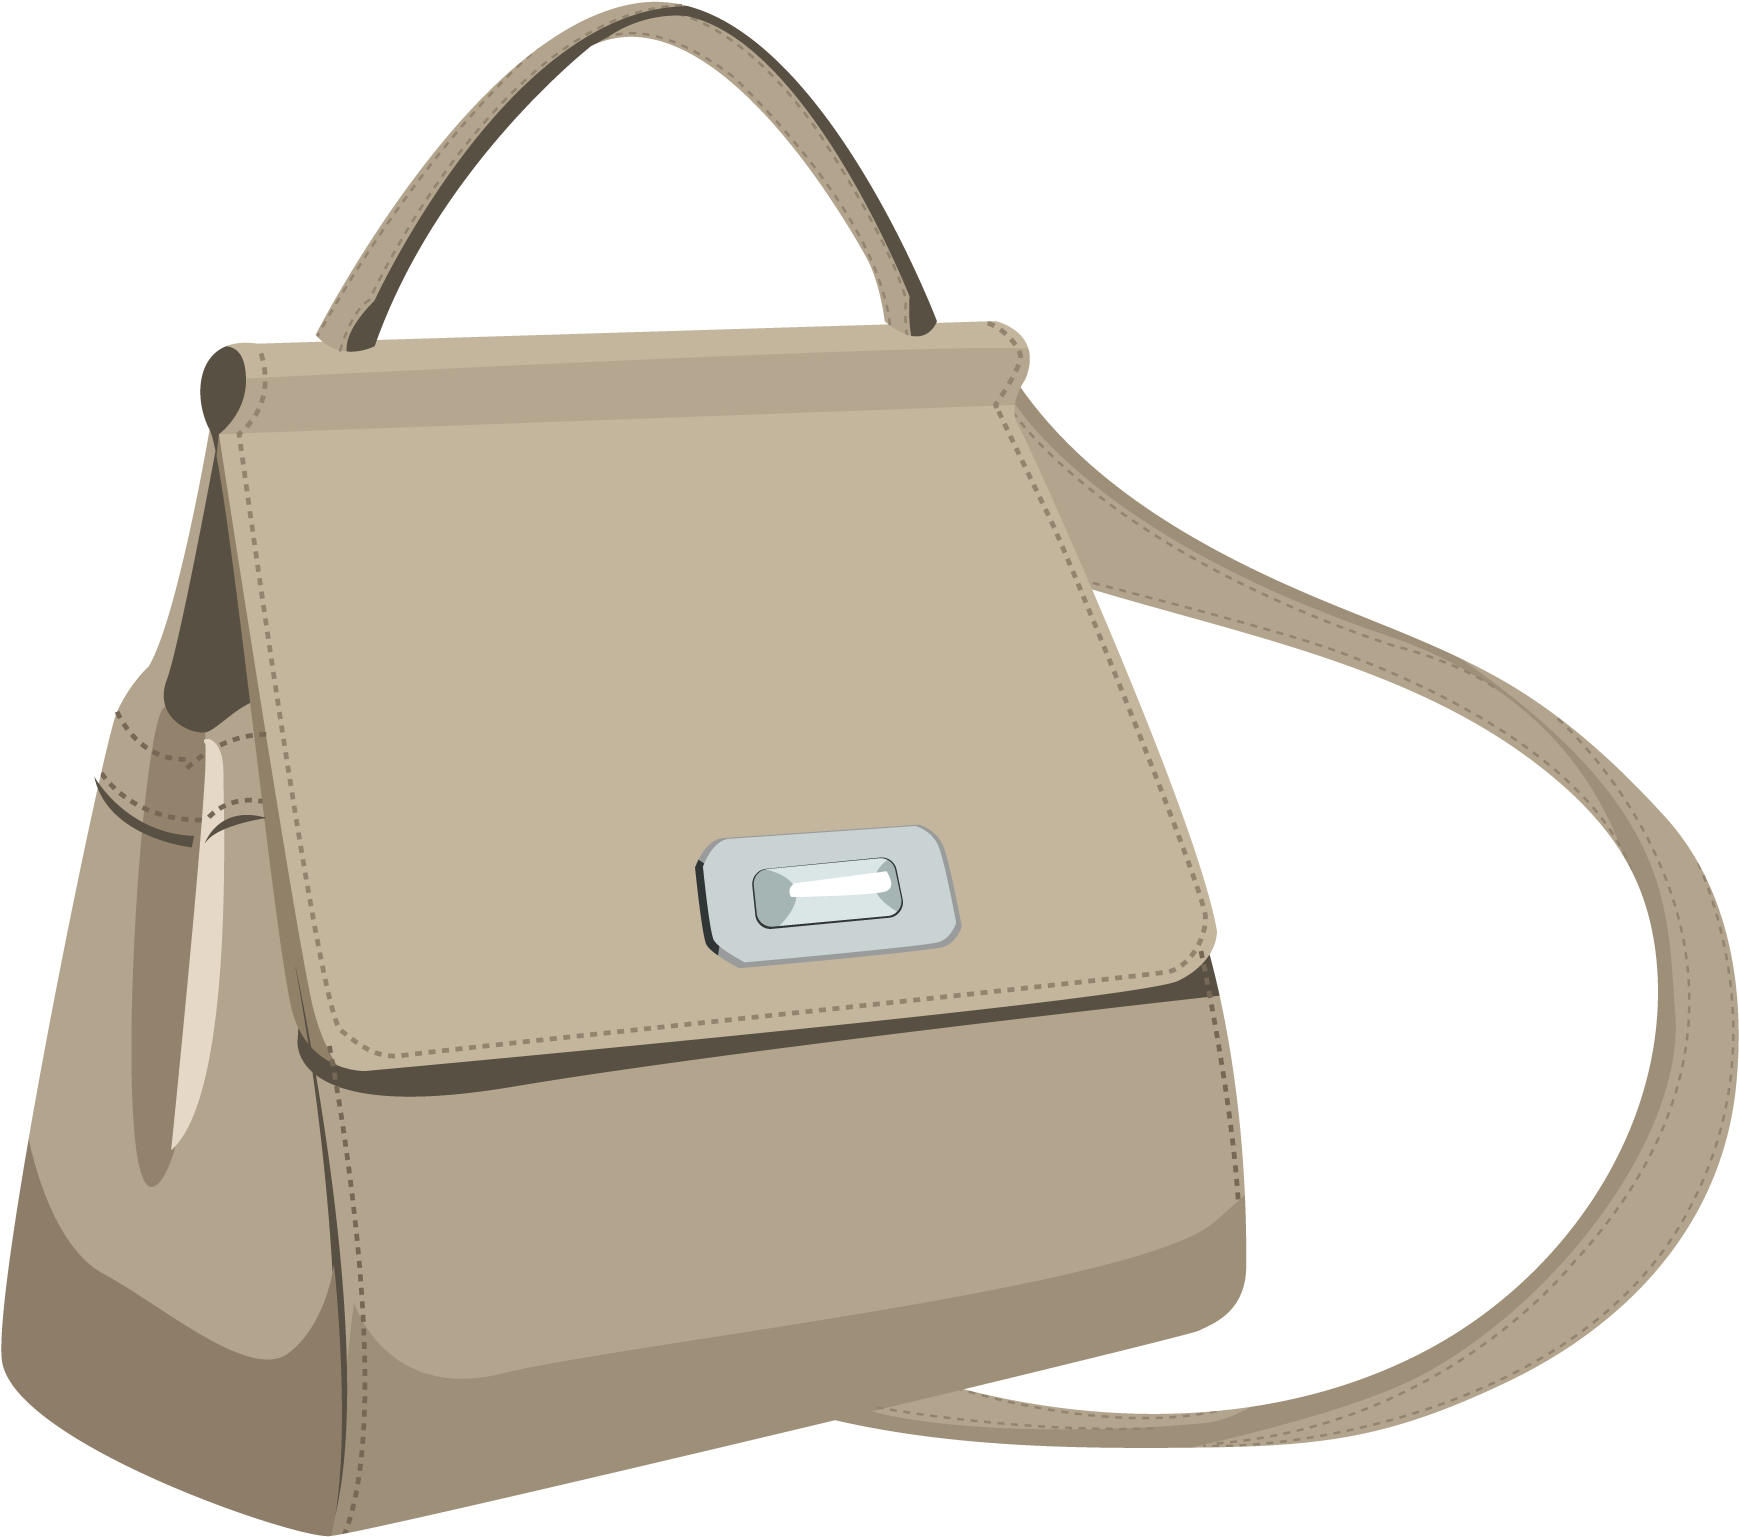 Female Fashion Elegant Bags and Purse vector illustration. Beauty fashion  objects icon concept. Stylish and casual trendy handbag vector design.  34721331 Vector Art at Vecteezy